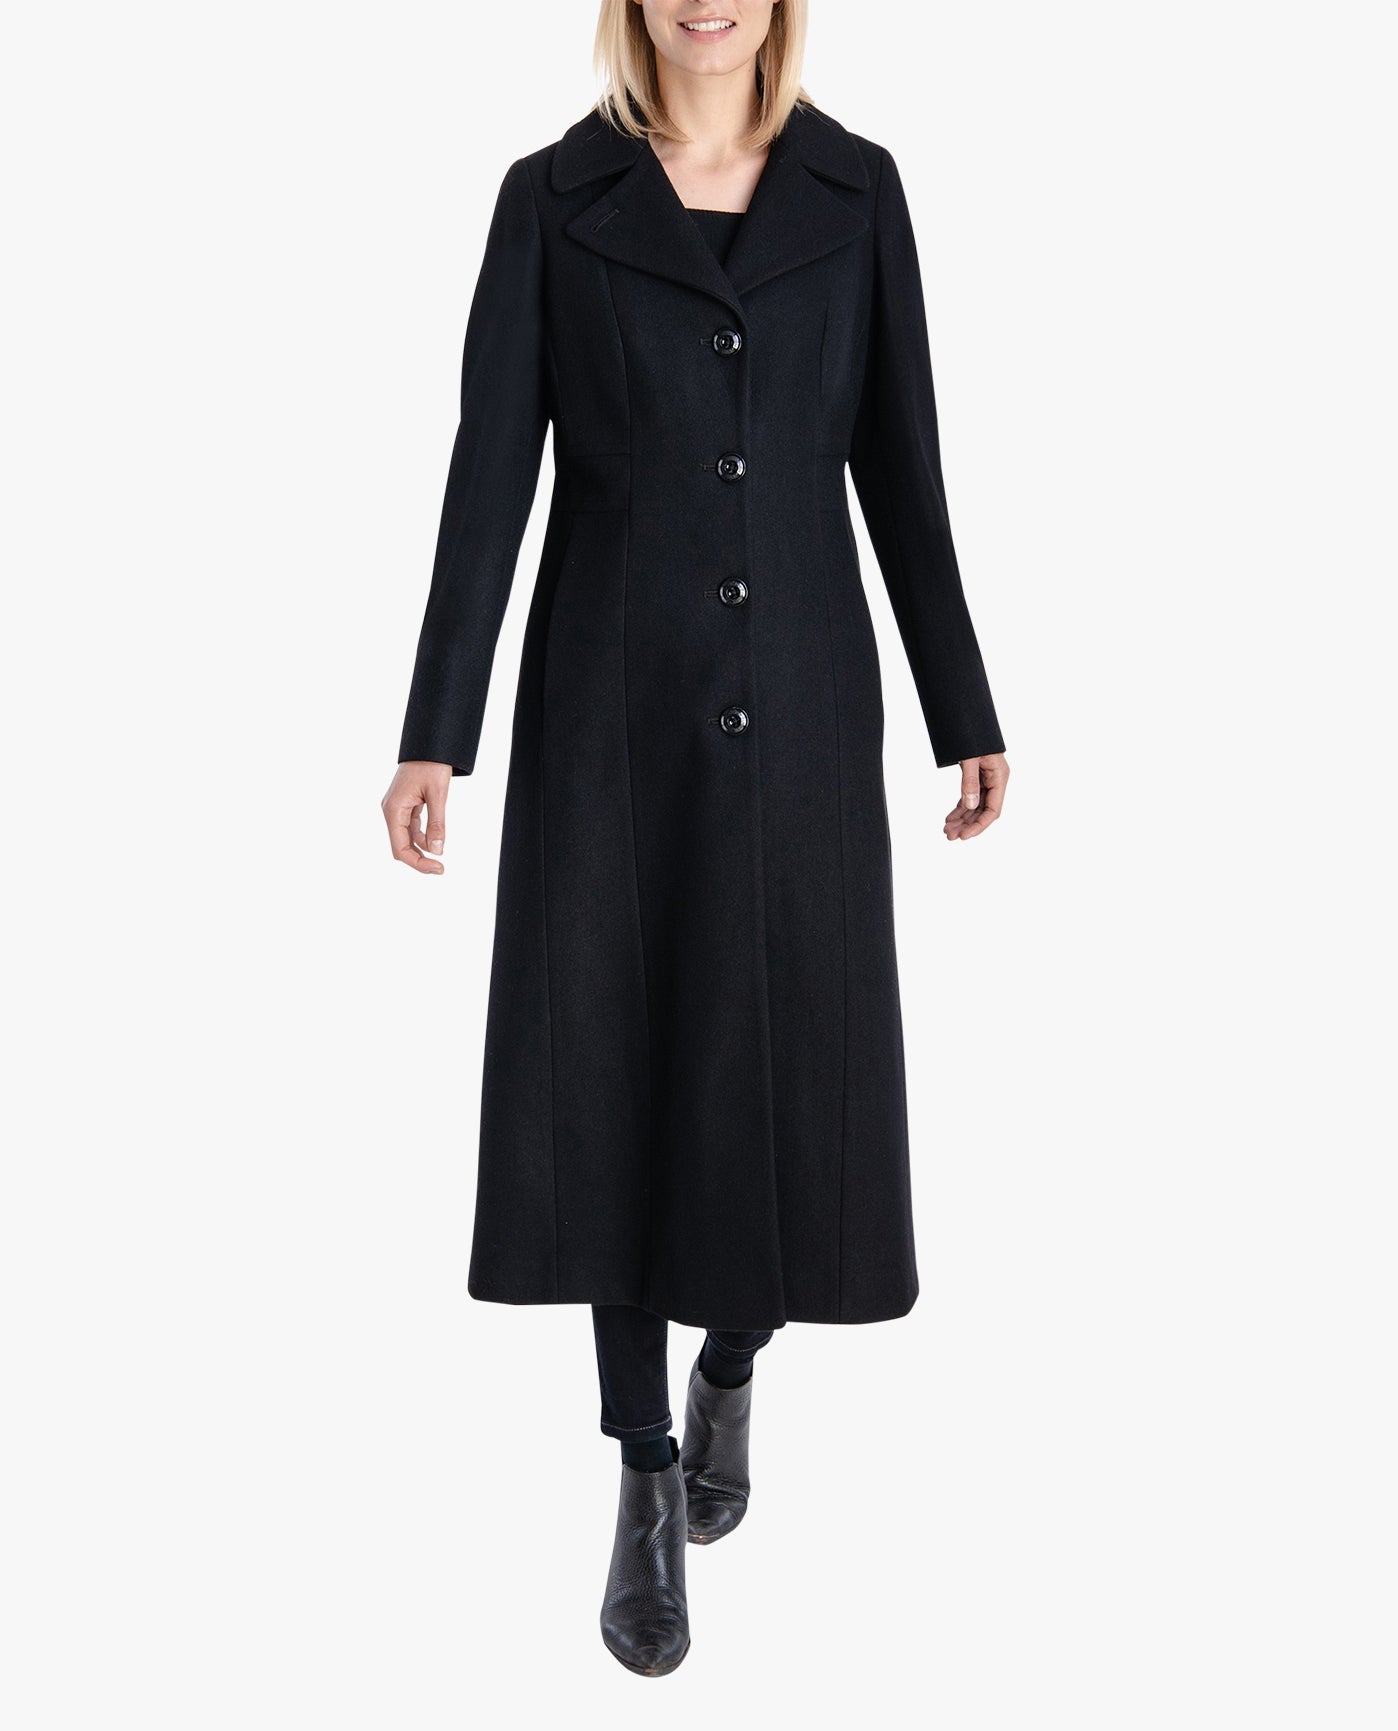 Front View Of SINGLE BREASTED MAXI PEACOAT | BLACK